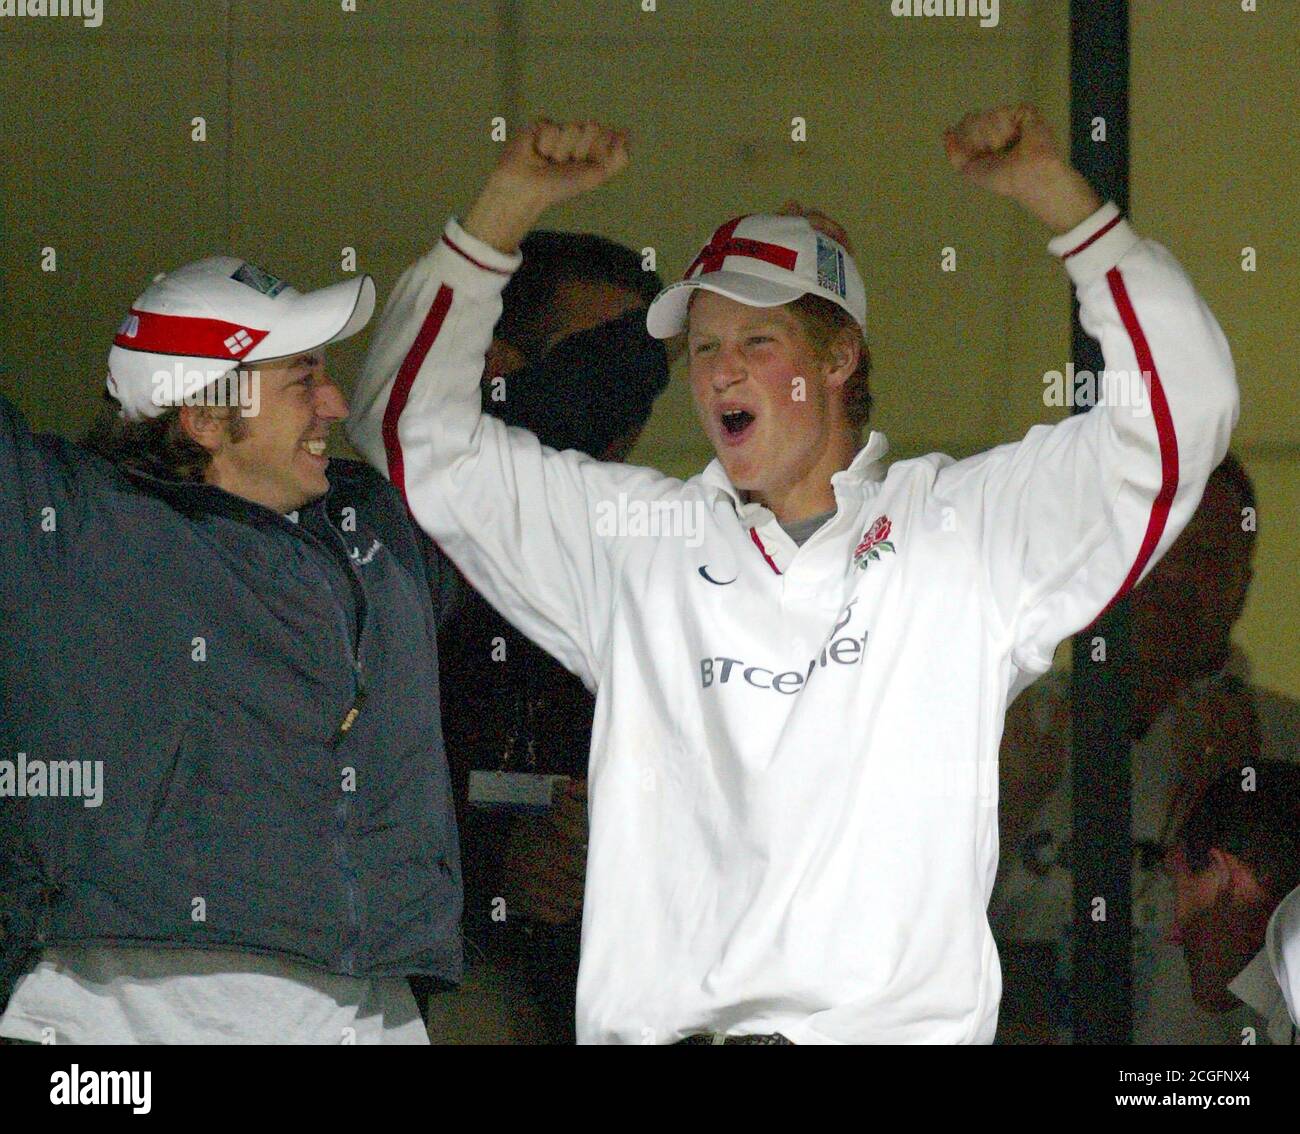 PRINCE HARRY CELEBRATES ENGLAND’s VICTORY ENGLAND v SOUTH AFRICA, 2003 RUGBY WORLD CUP, PERTH, AUSTRALIA - 18/10/2003  PICTURE : MARK PAIN / ALAMY Stock Photo